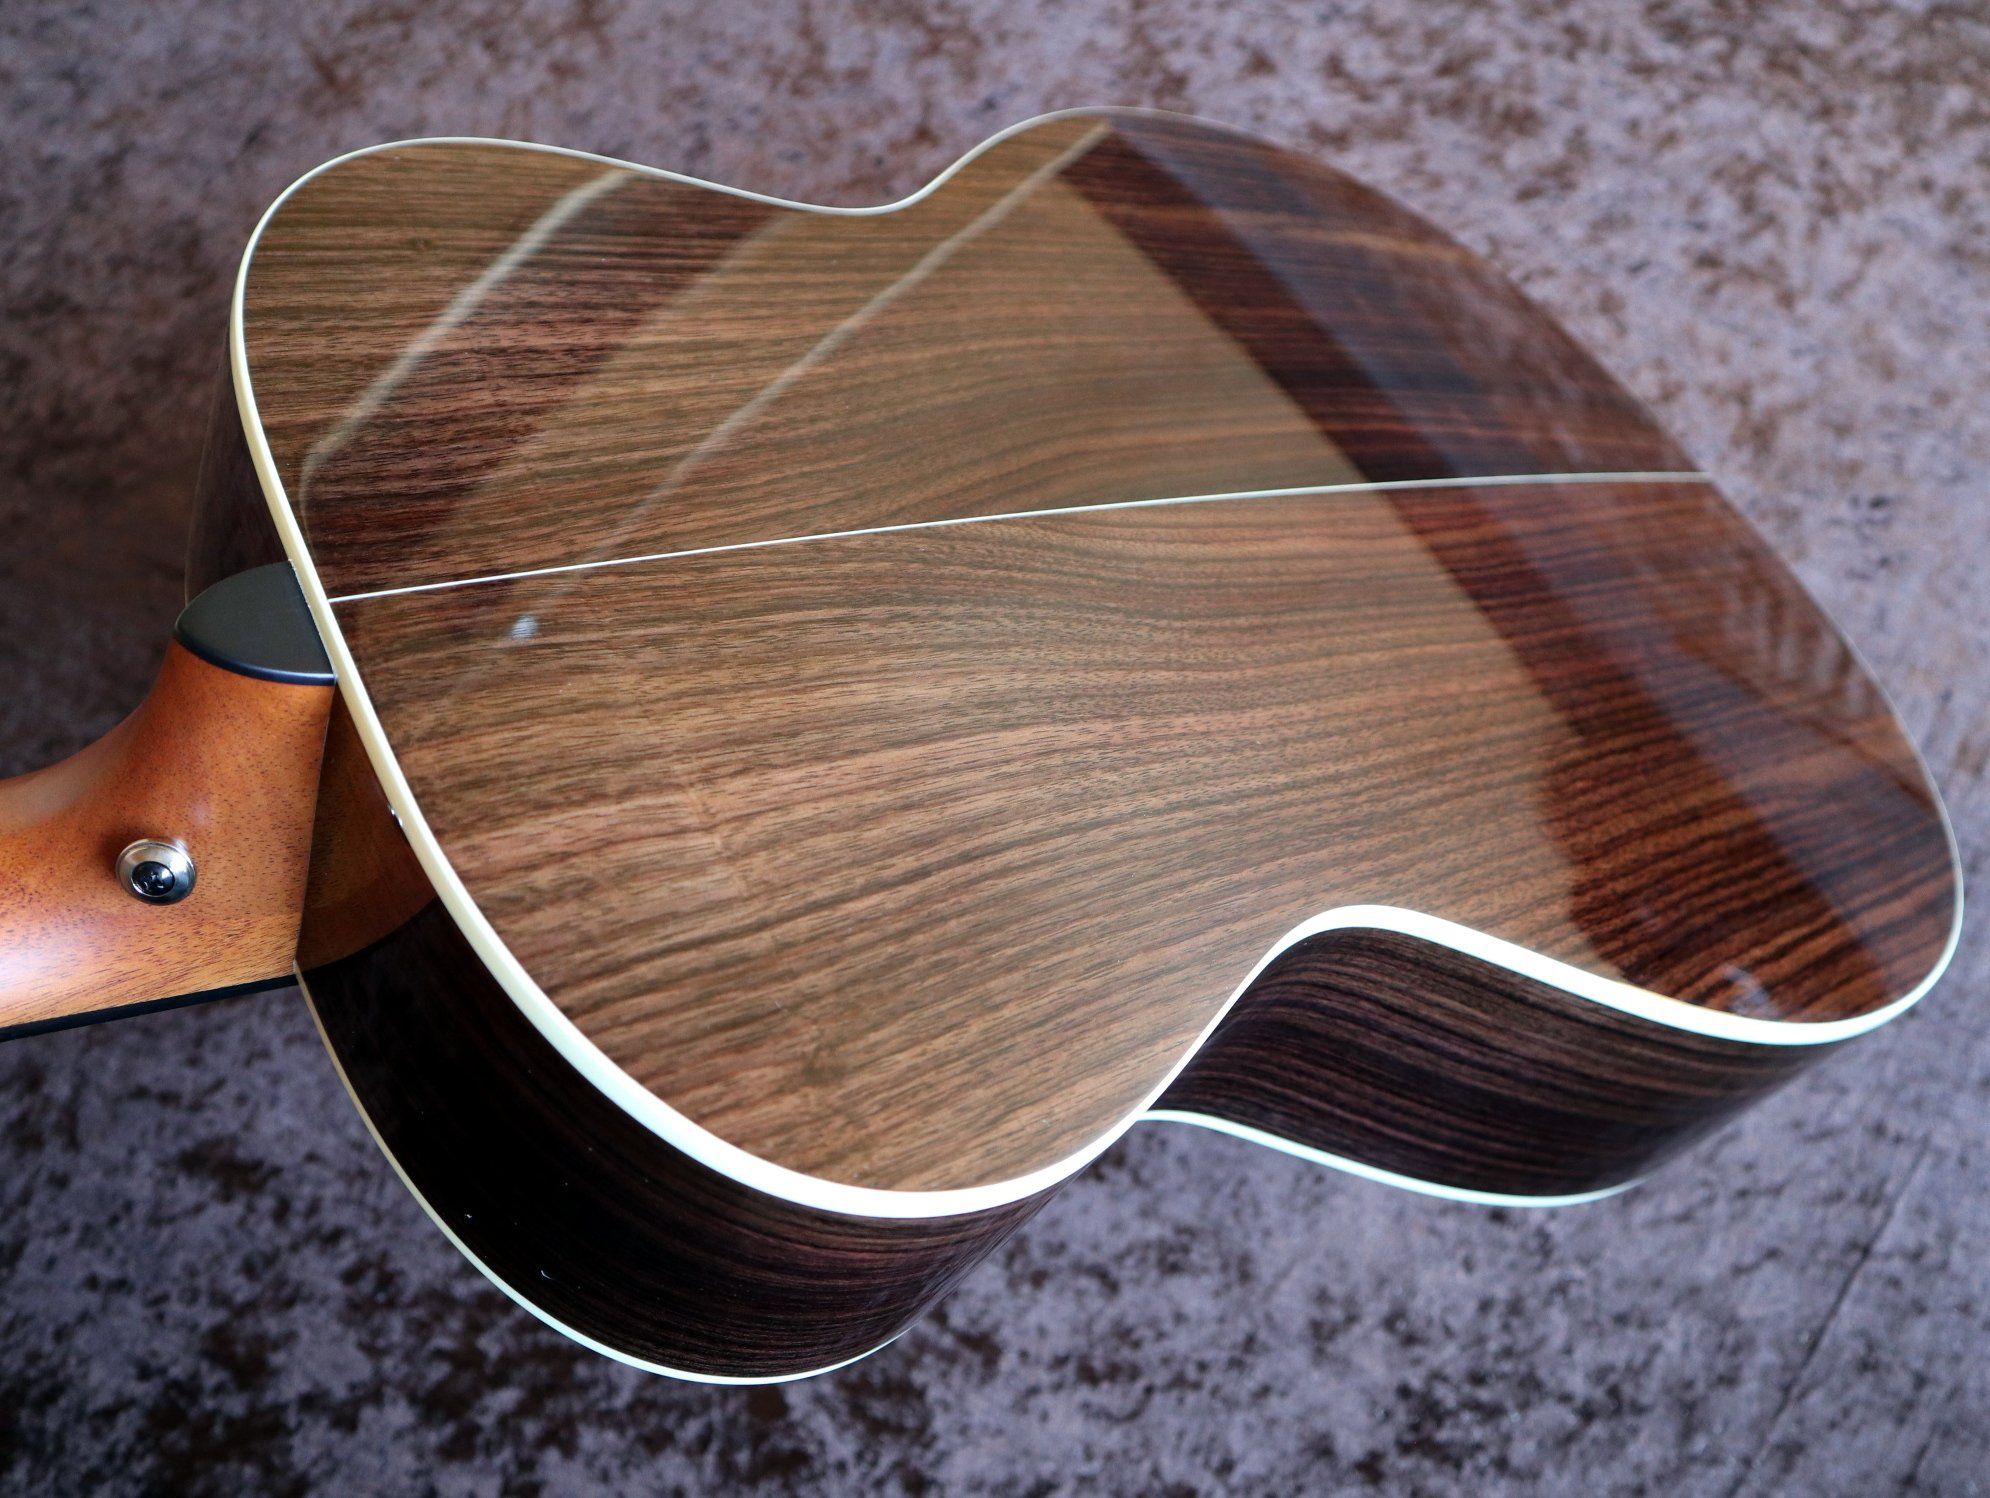 Furch Green Plus OM SR (Spruce / Rosewood), Acoustic Guitar for sale at Richards Guitars.